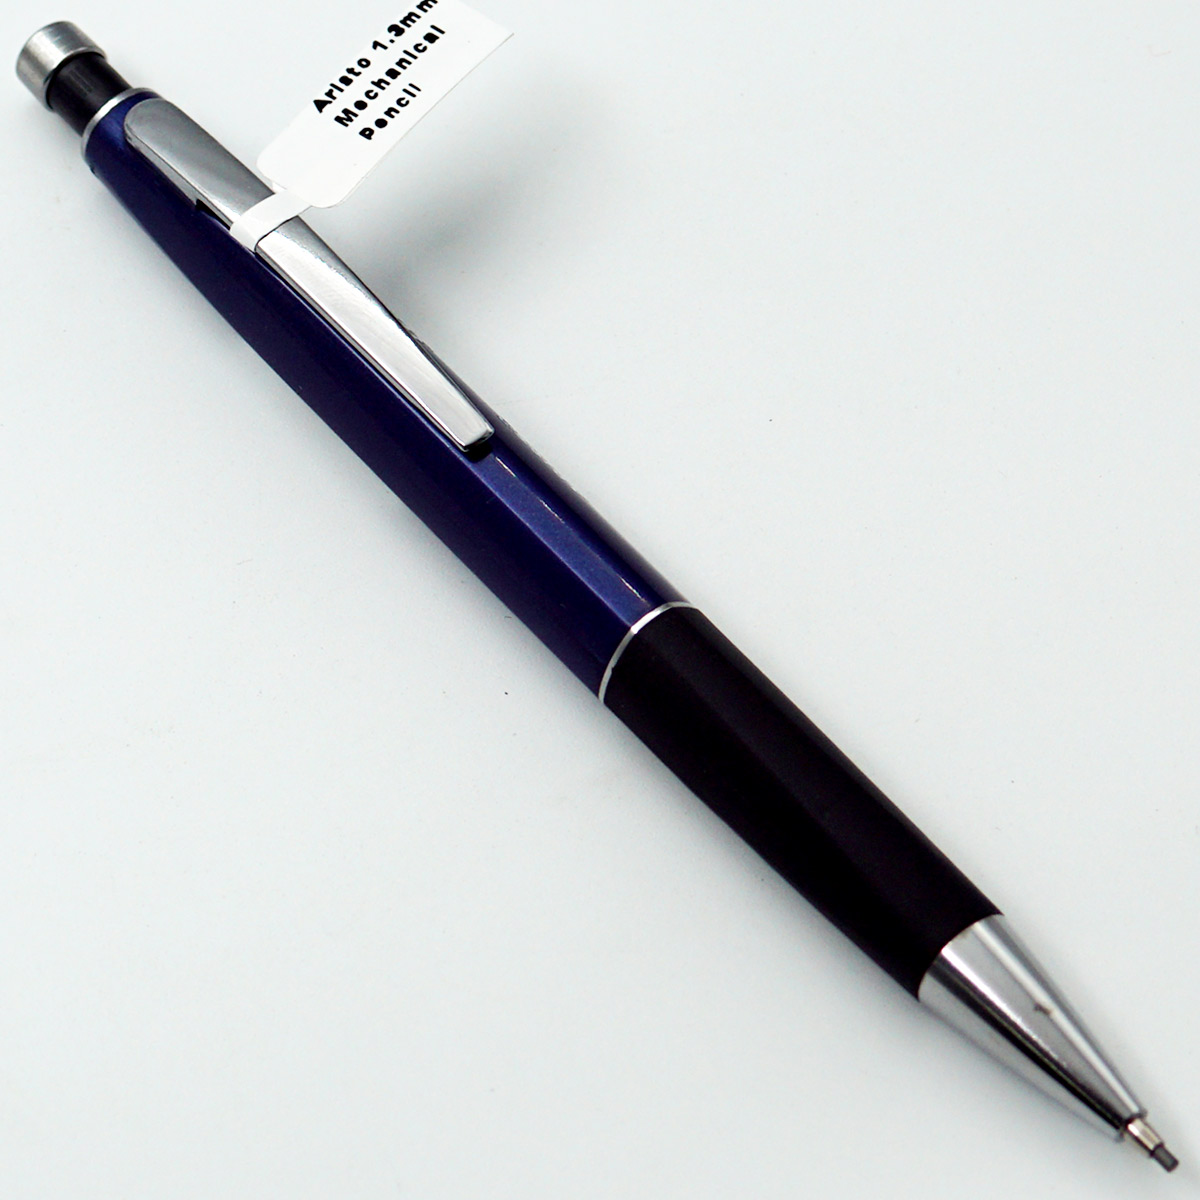 Aristo 1.3mm Blue Color Body With Silver Clip Mechanical Pencil SKU 24667